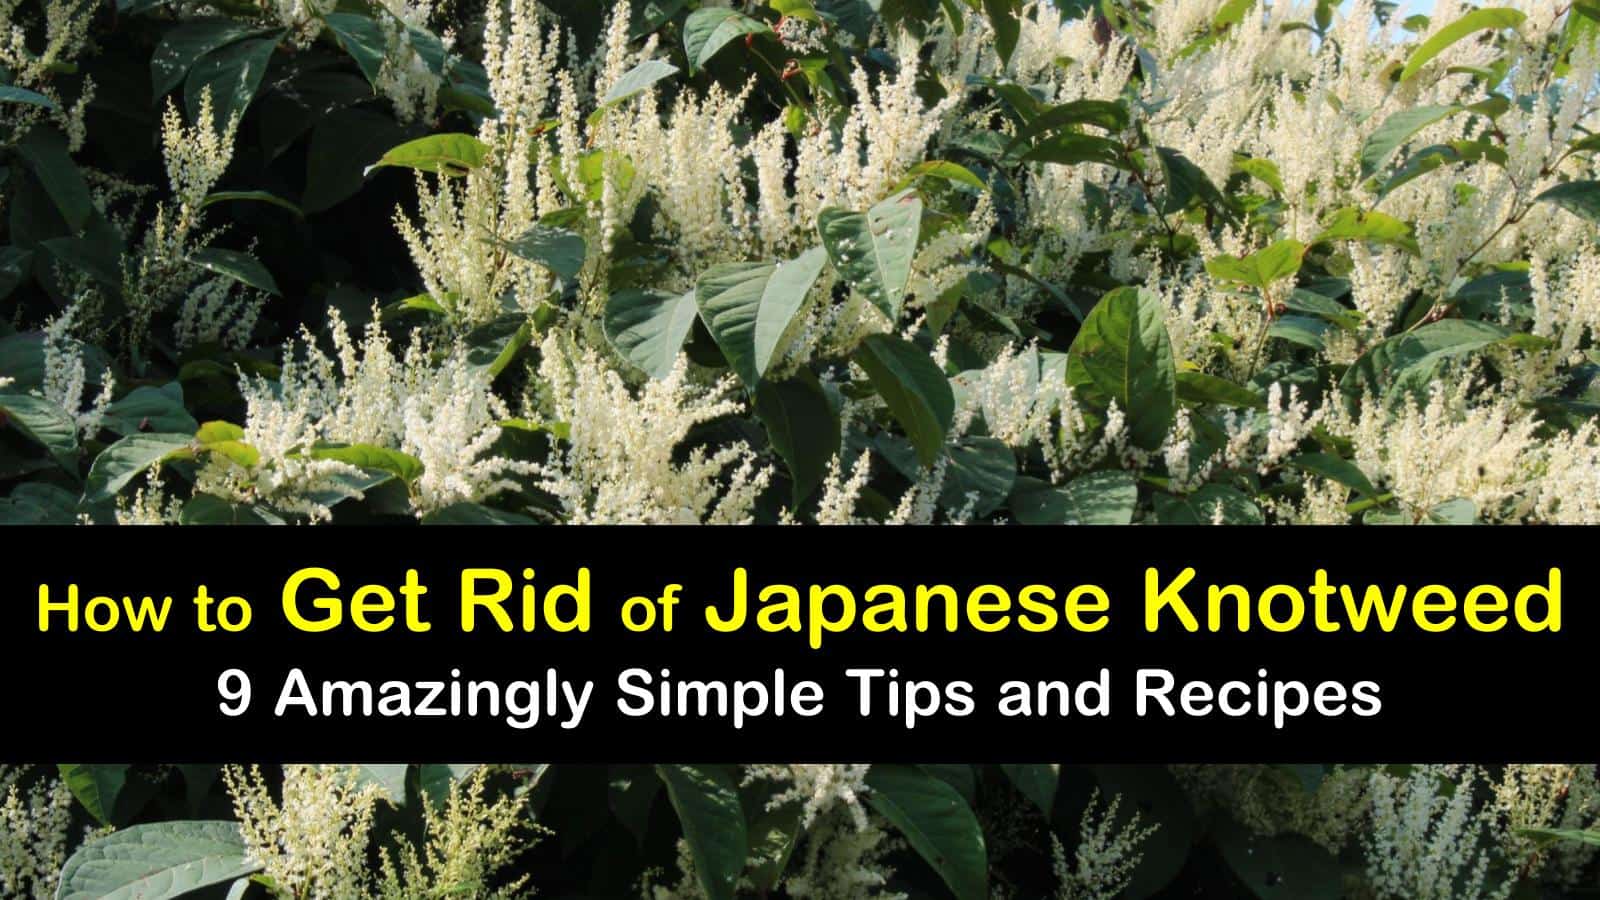 how to get rid of Japanese knotweed titleimg1